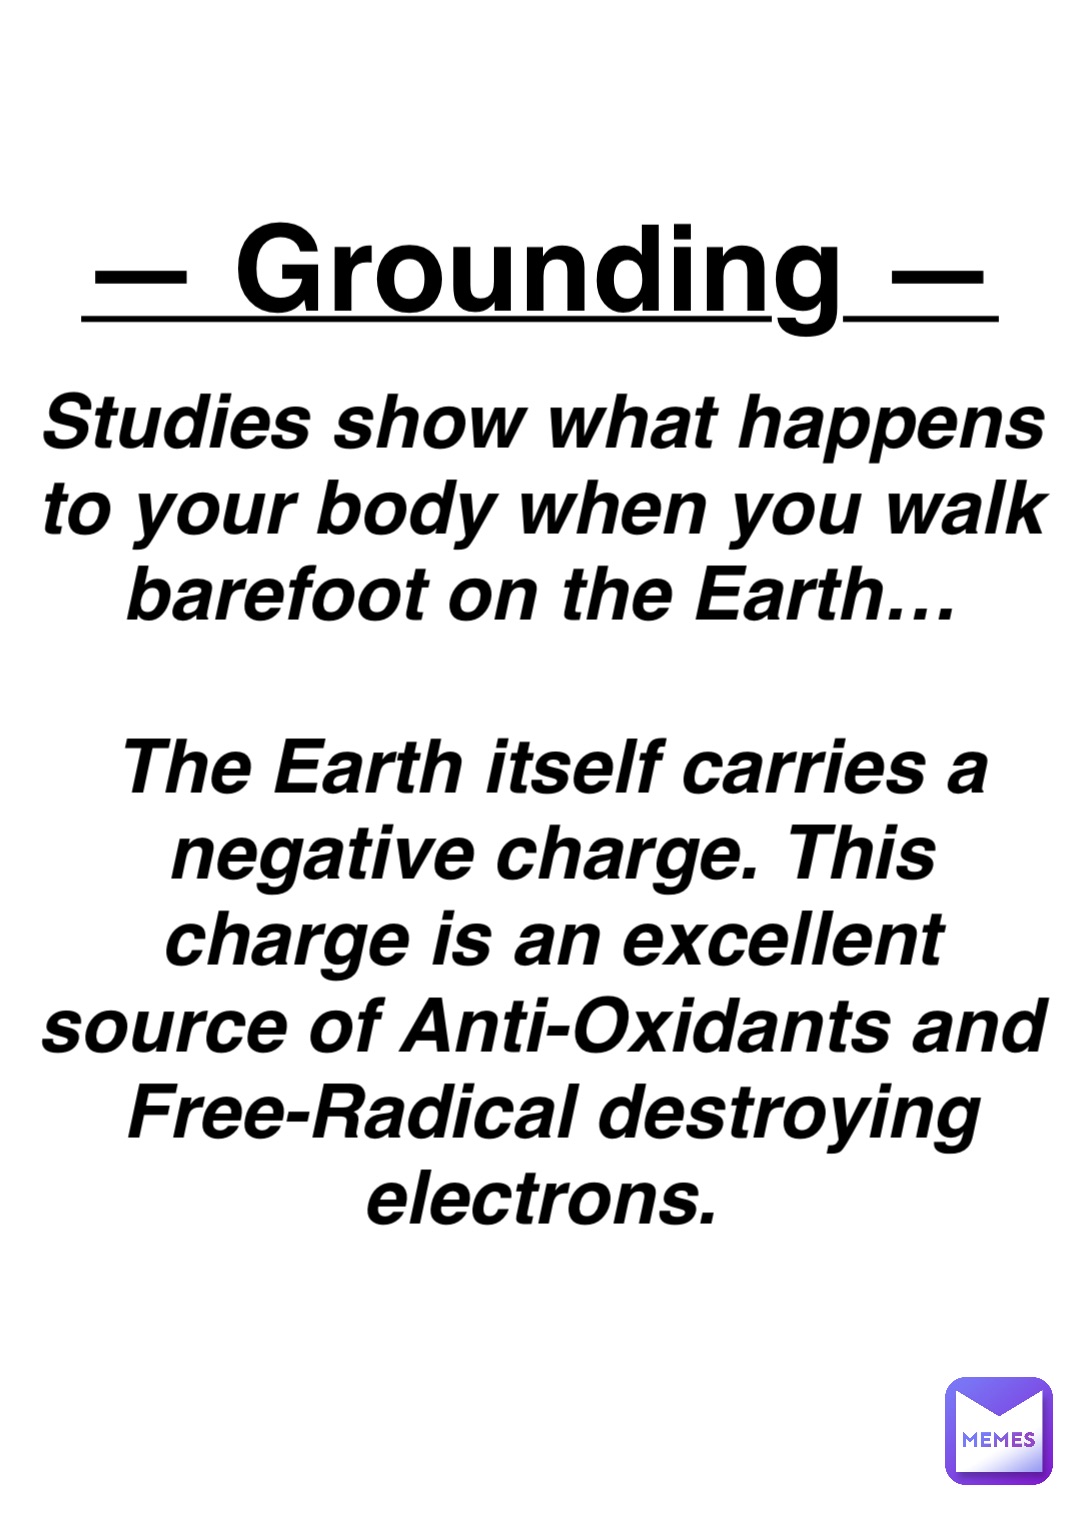 Double tap to edit Studies show what happens to your body when you walk barefoot on the Earth…

The Earth itself carries a negative charge. This charge is an excellent source of Anti-Oxidants and Free-Radical destroying electrons. — Grounding —